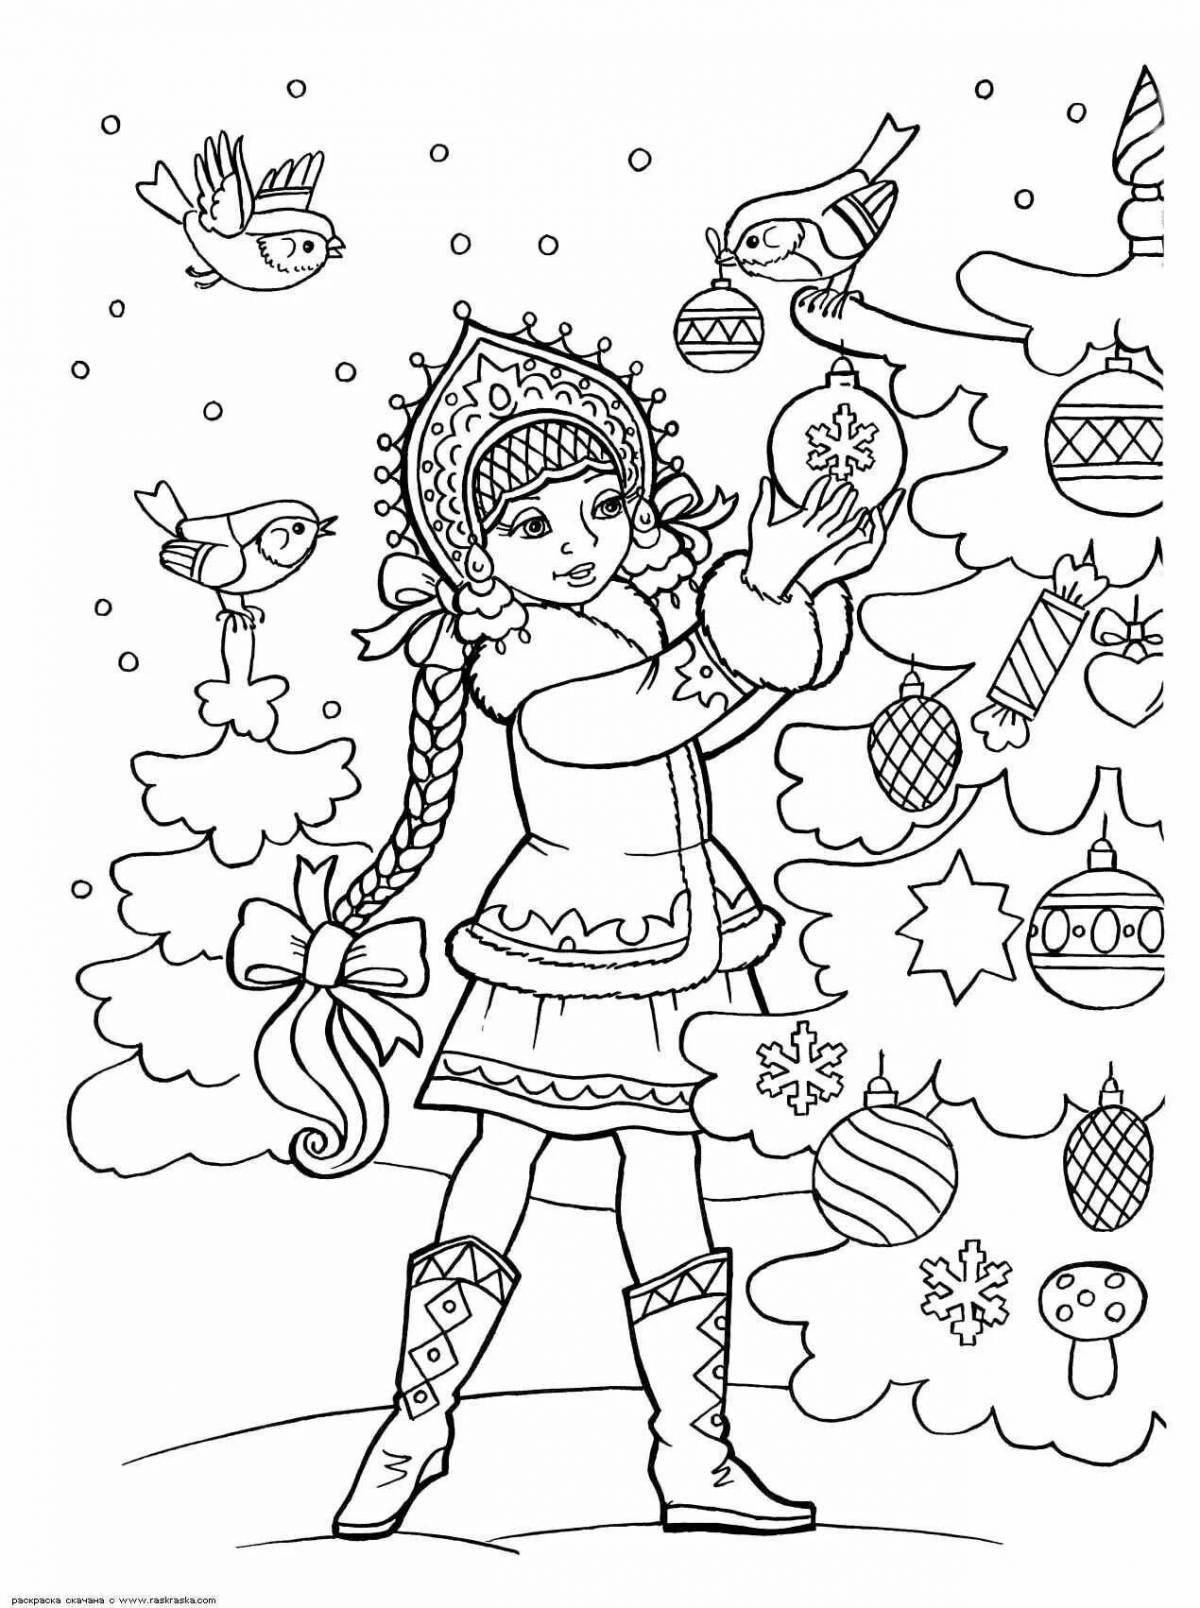 Adorable Christmas coloring book for kids